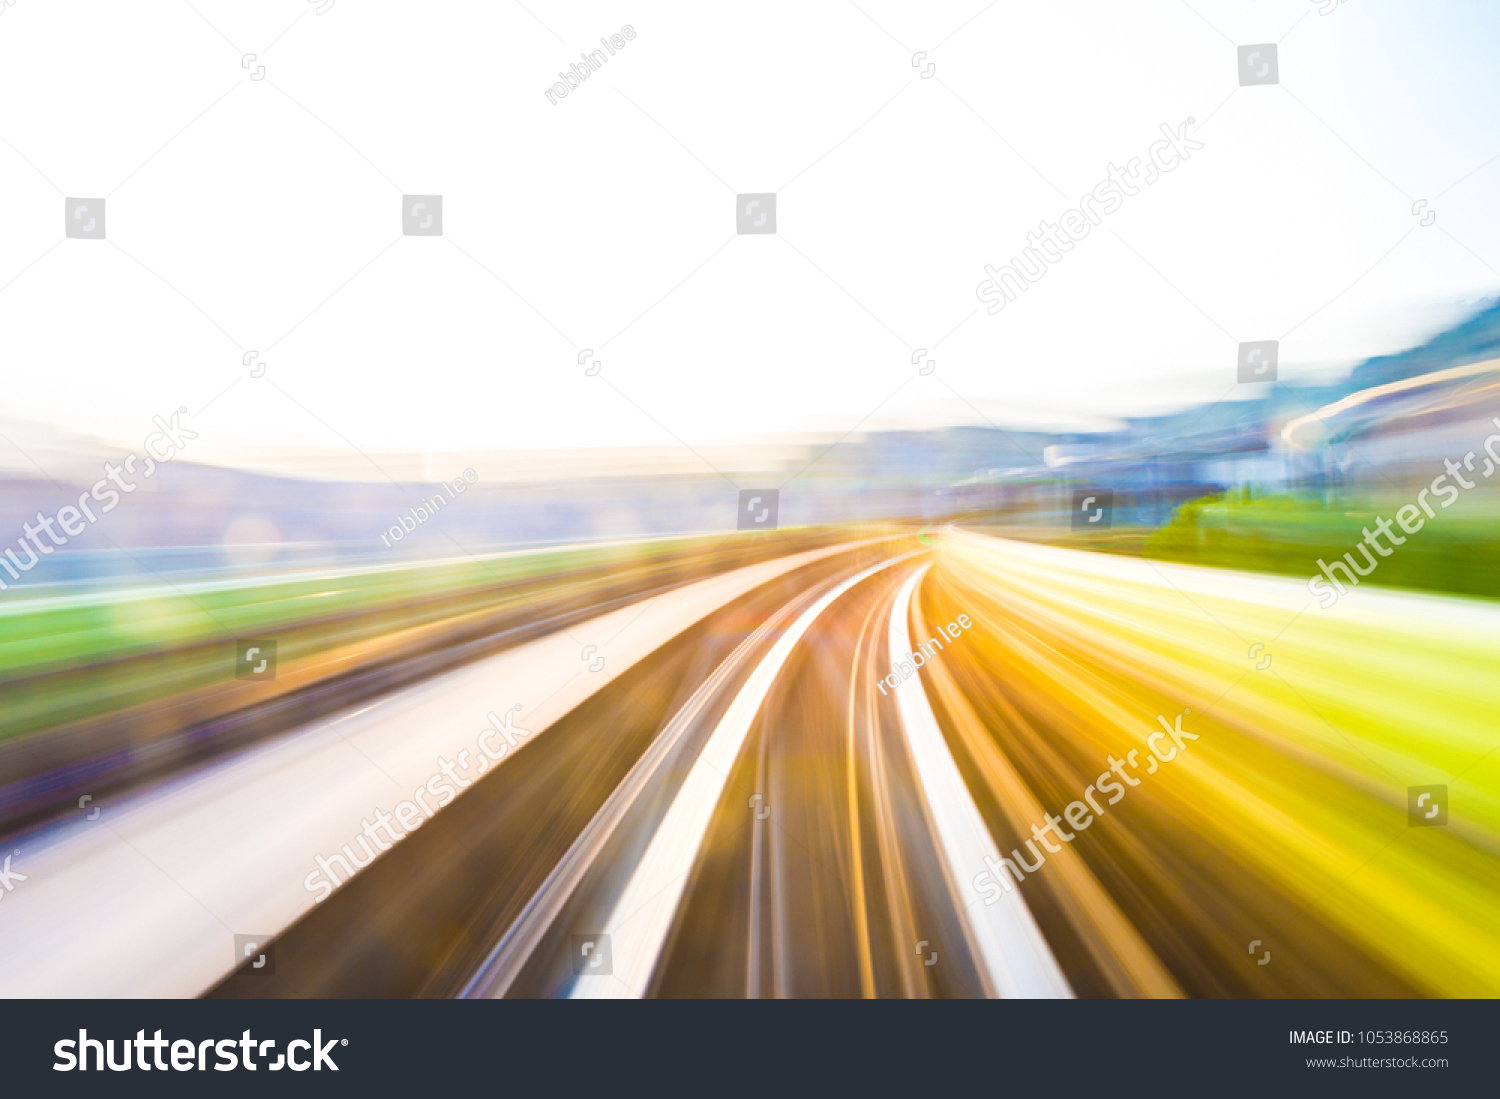 Speed motion in urban highway road tunnel #1053868865